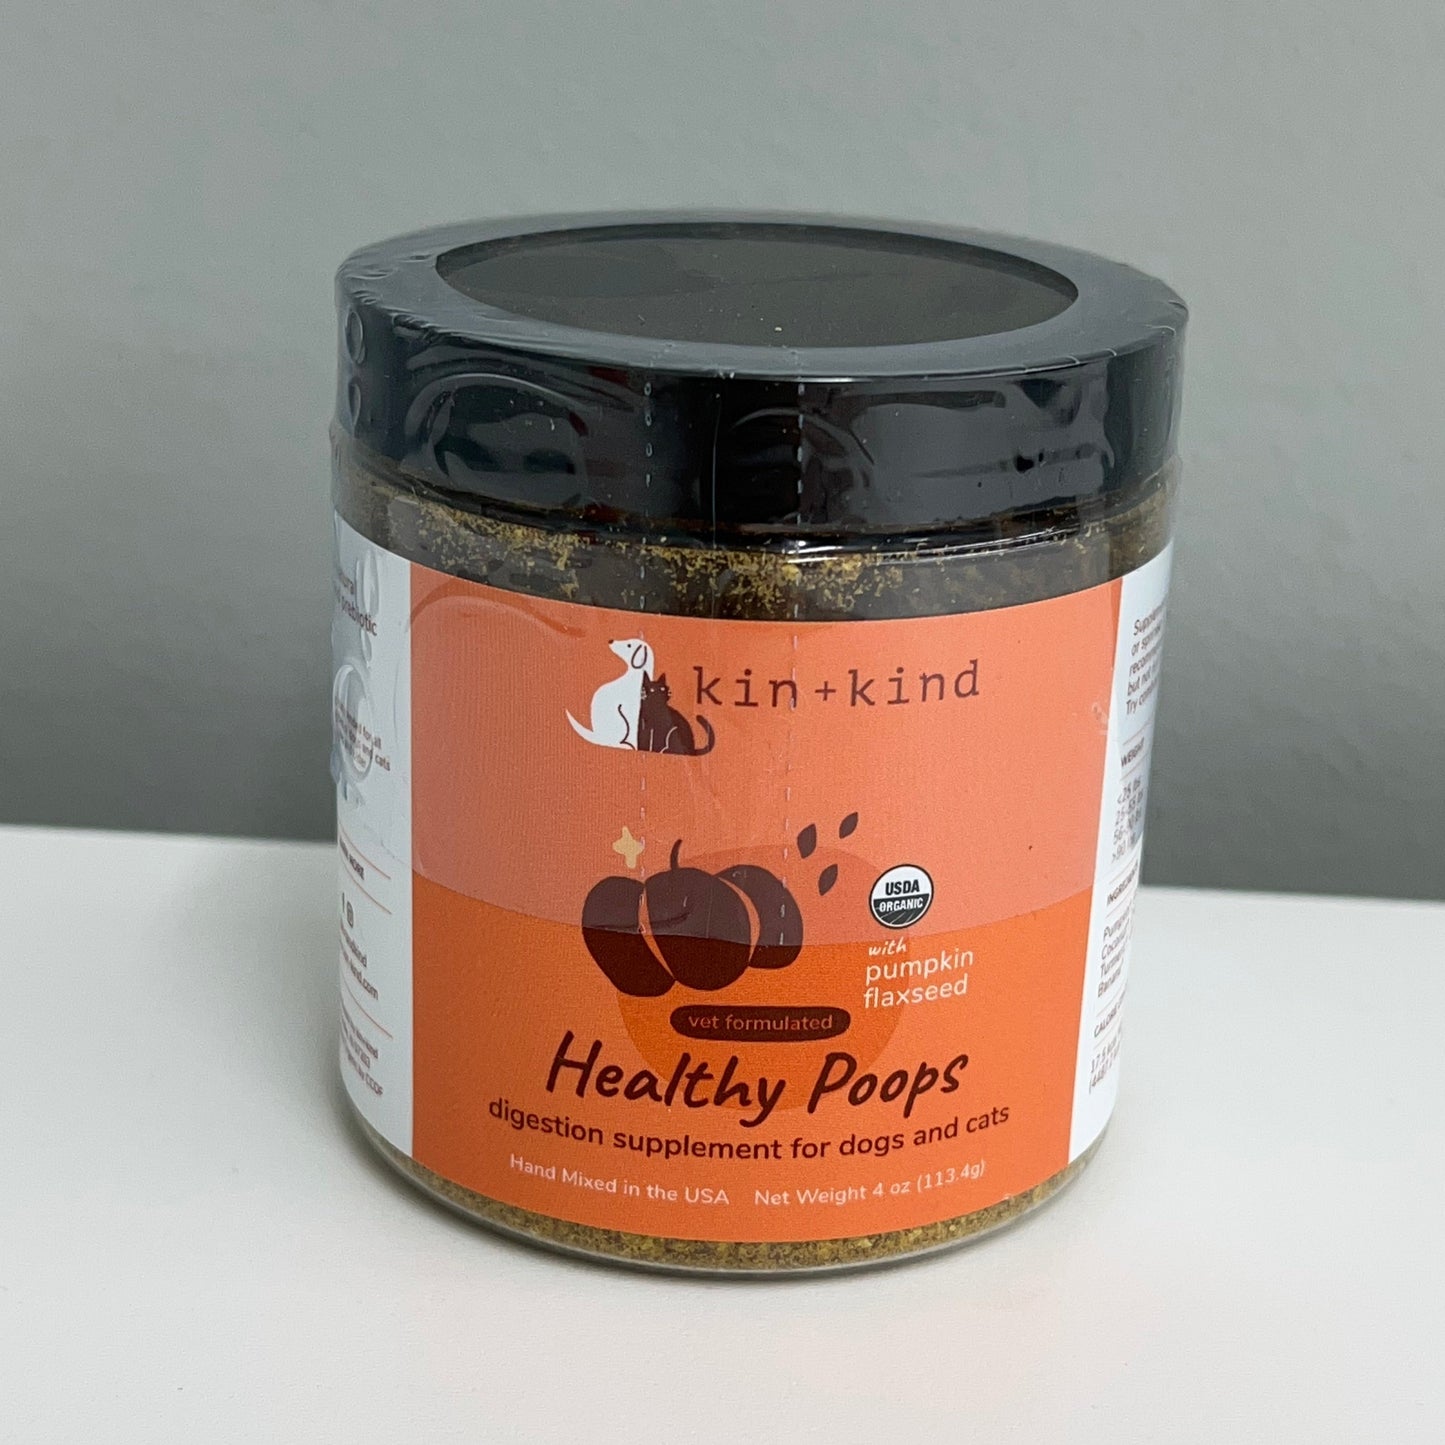 Kin + Kind Healthy Poops Dog and Cat Supplement